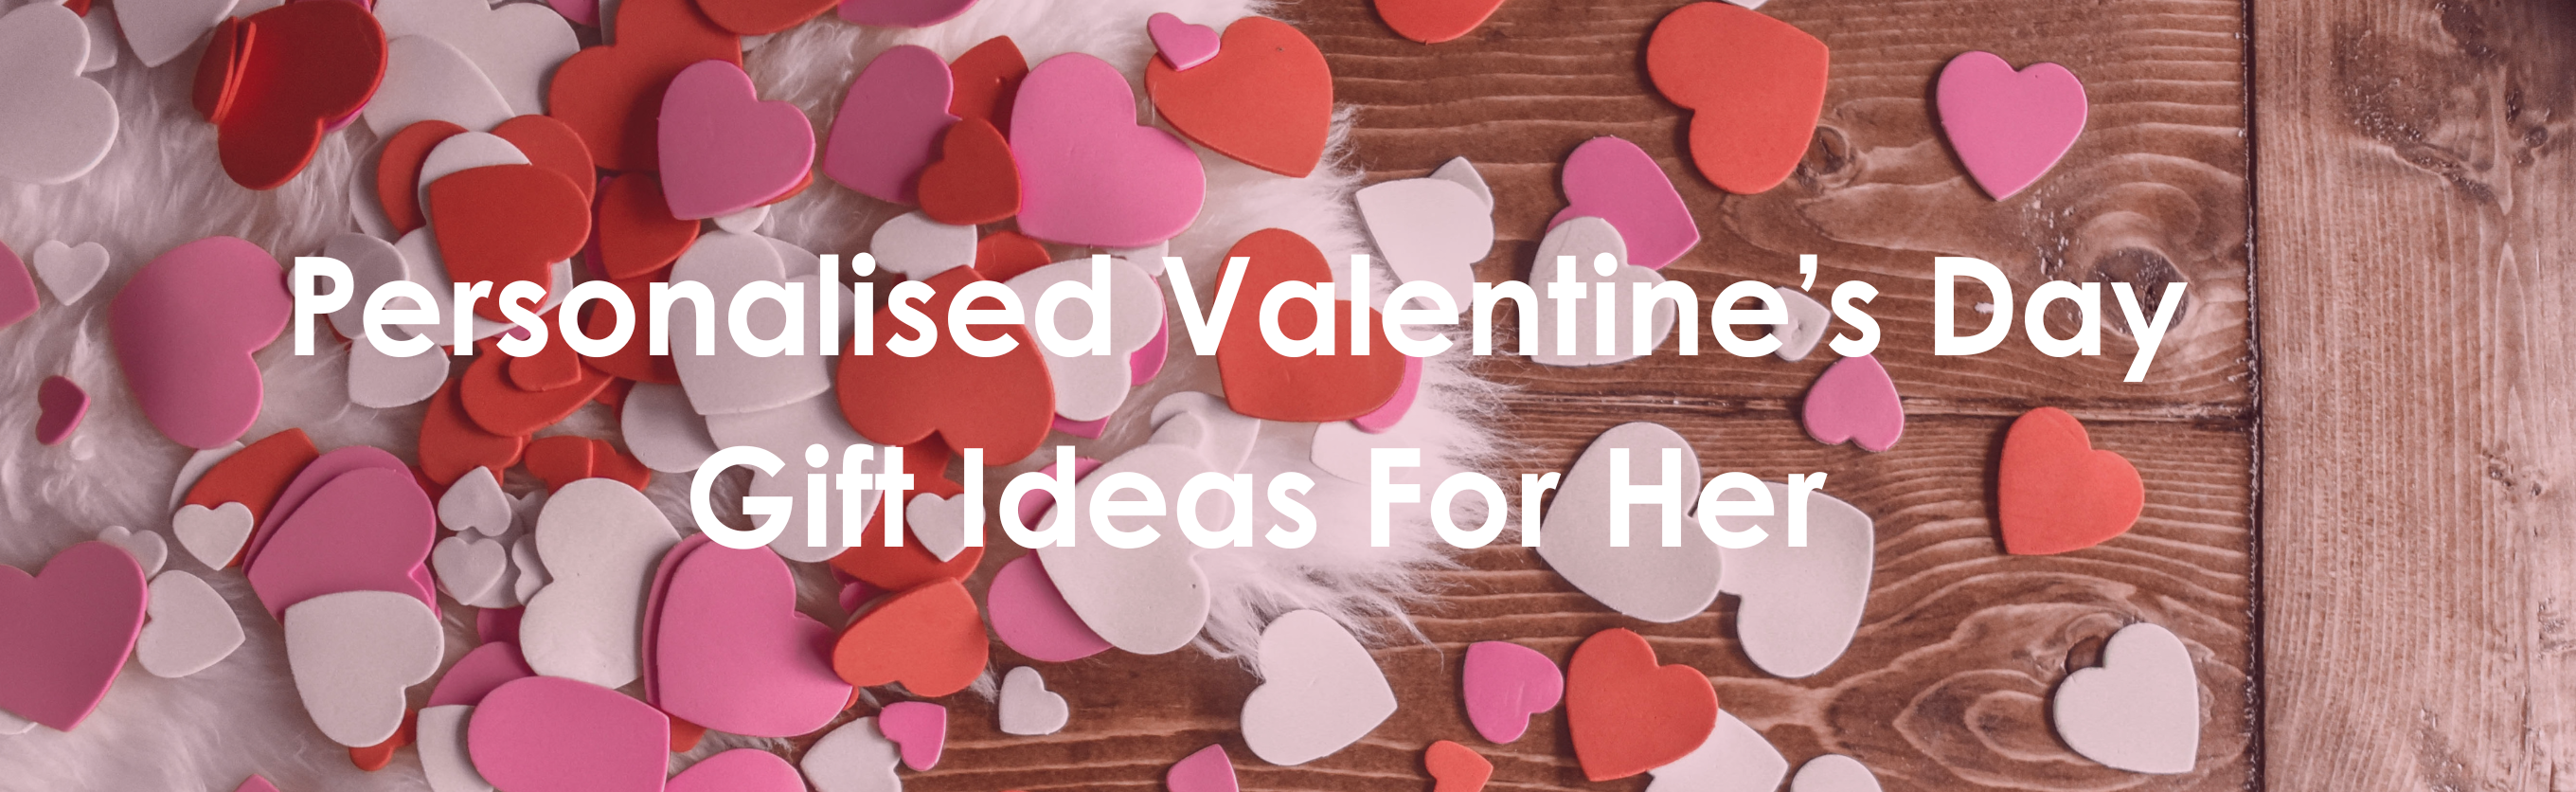 10 Thoughtful Valentine’s Day Gift Ideas for Her